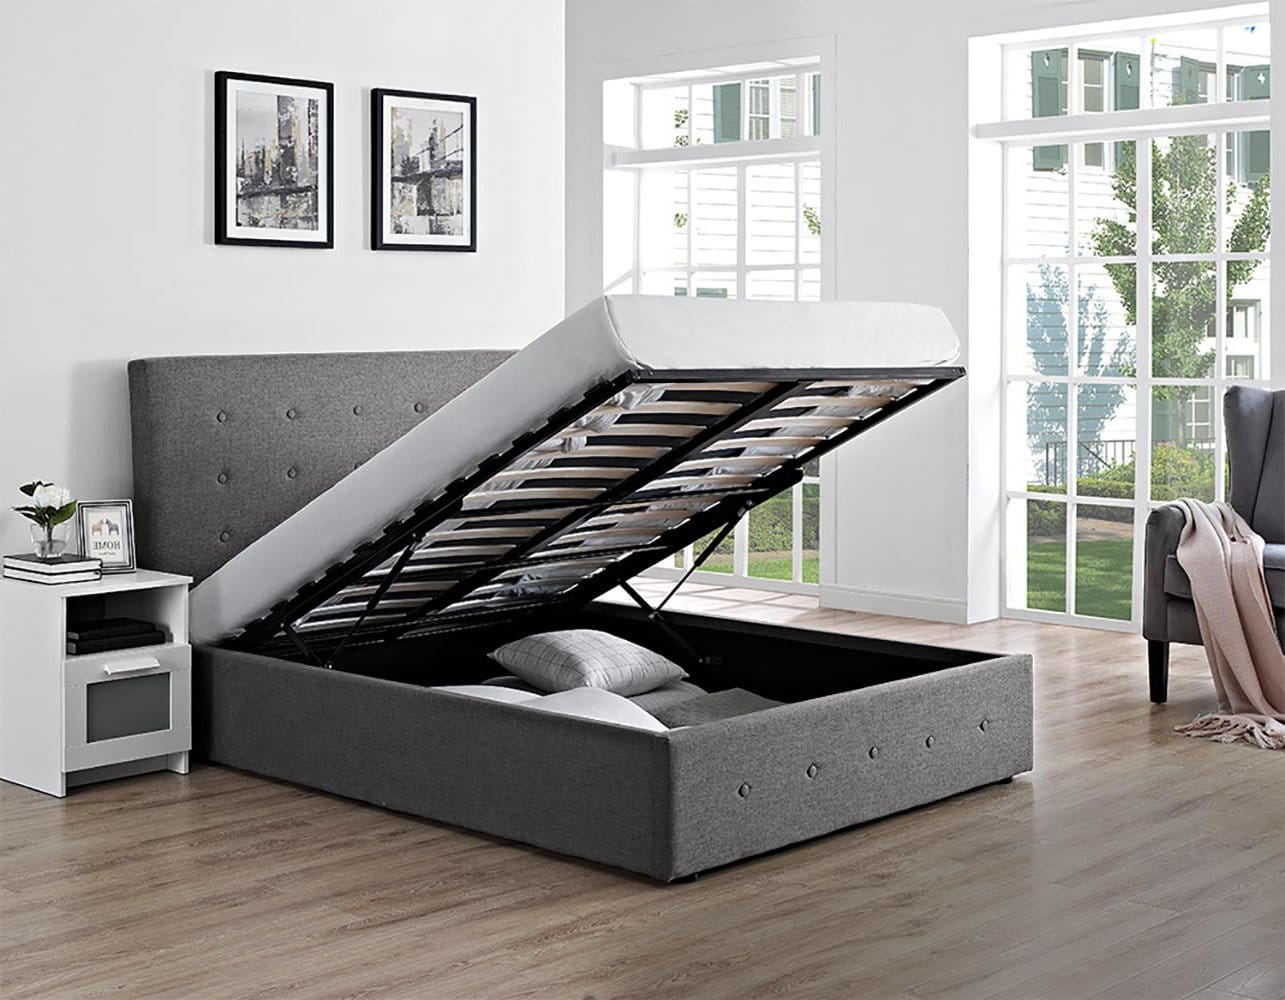 Chanel Upholstered Ottoman Storage Bed